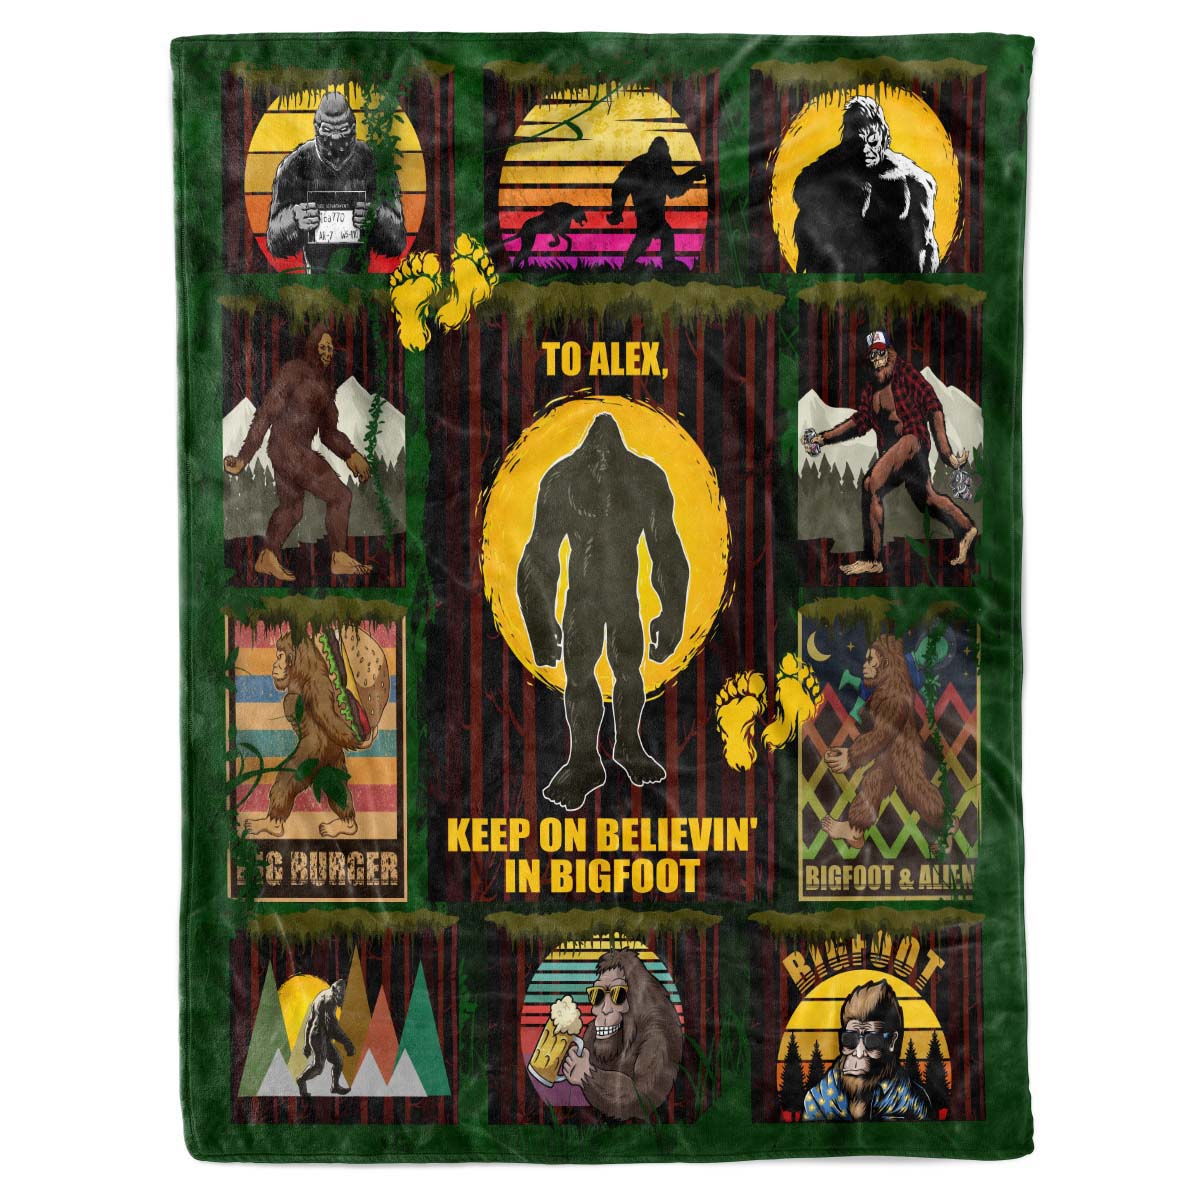 Personalized Custom Name Bigfoot Sasquatch Believe Hide and Seek World Champion Sherpa Fleece Throw Blanket Birthday Big Foot Camping Presents for Mom Dad Wife Husband Kids Son Daughter Campers